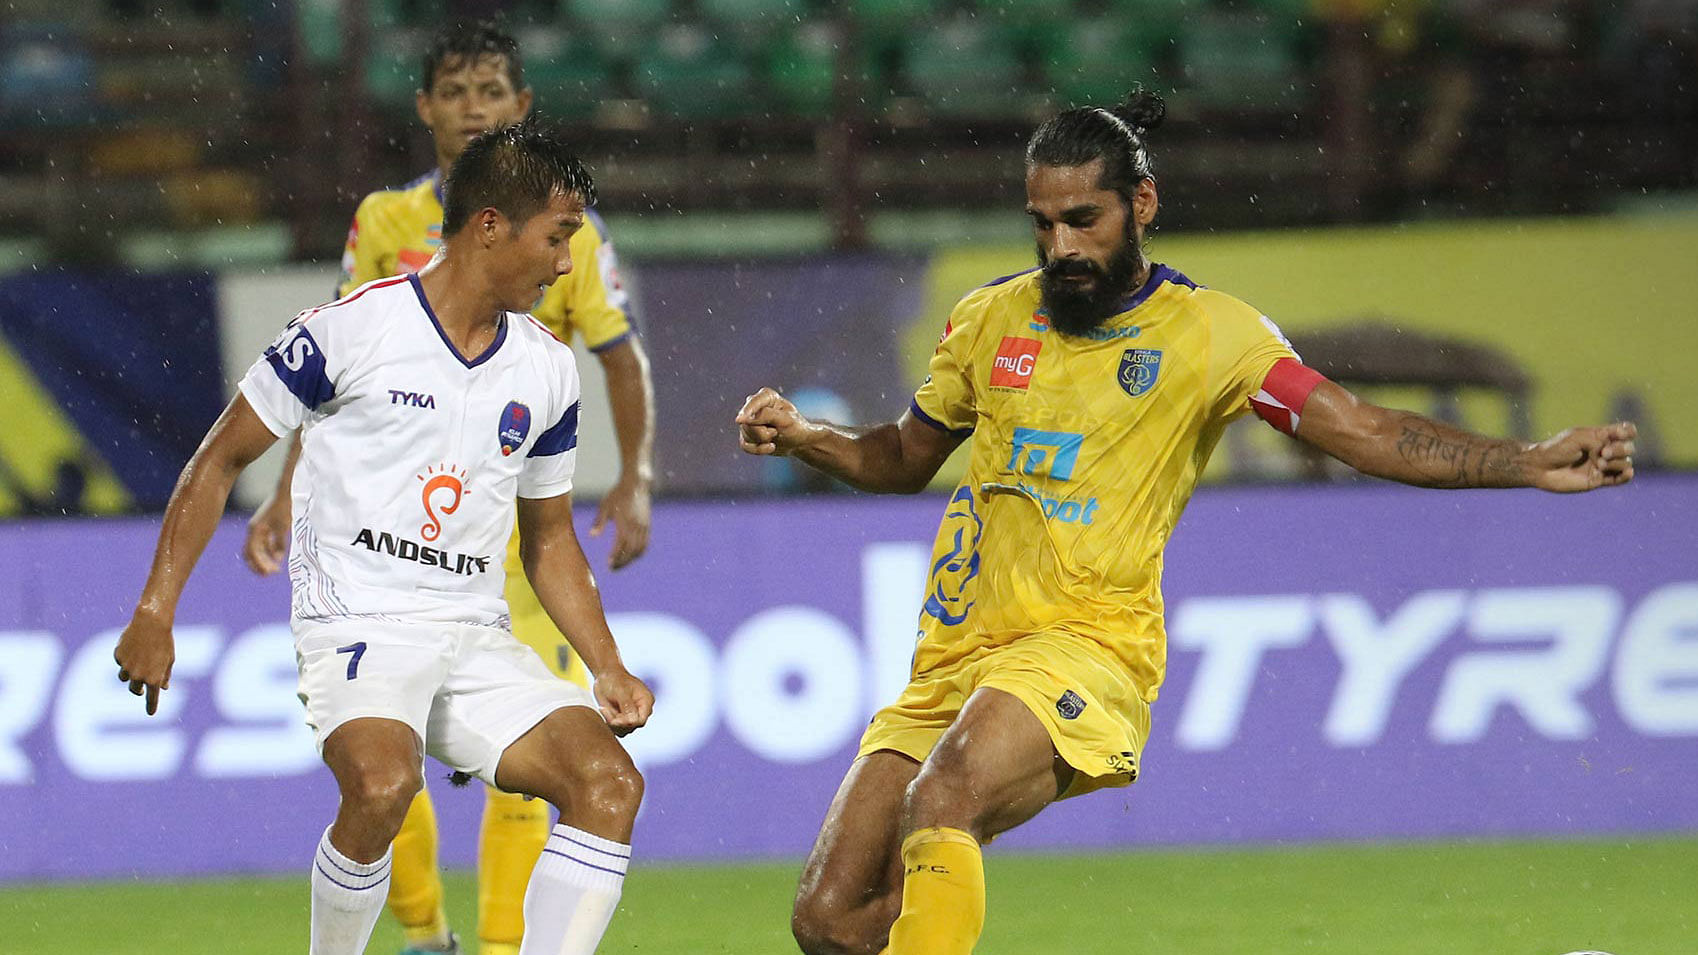 Delhi Dynamos struck a late goal to hold Kerala Blasters to a 1-1 draw in their Indian Super League football match.